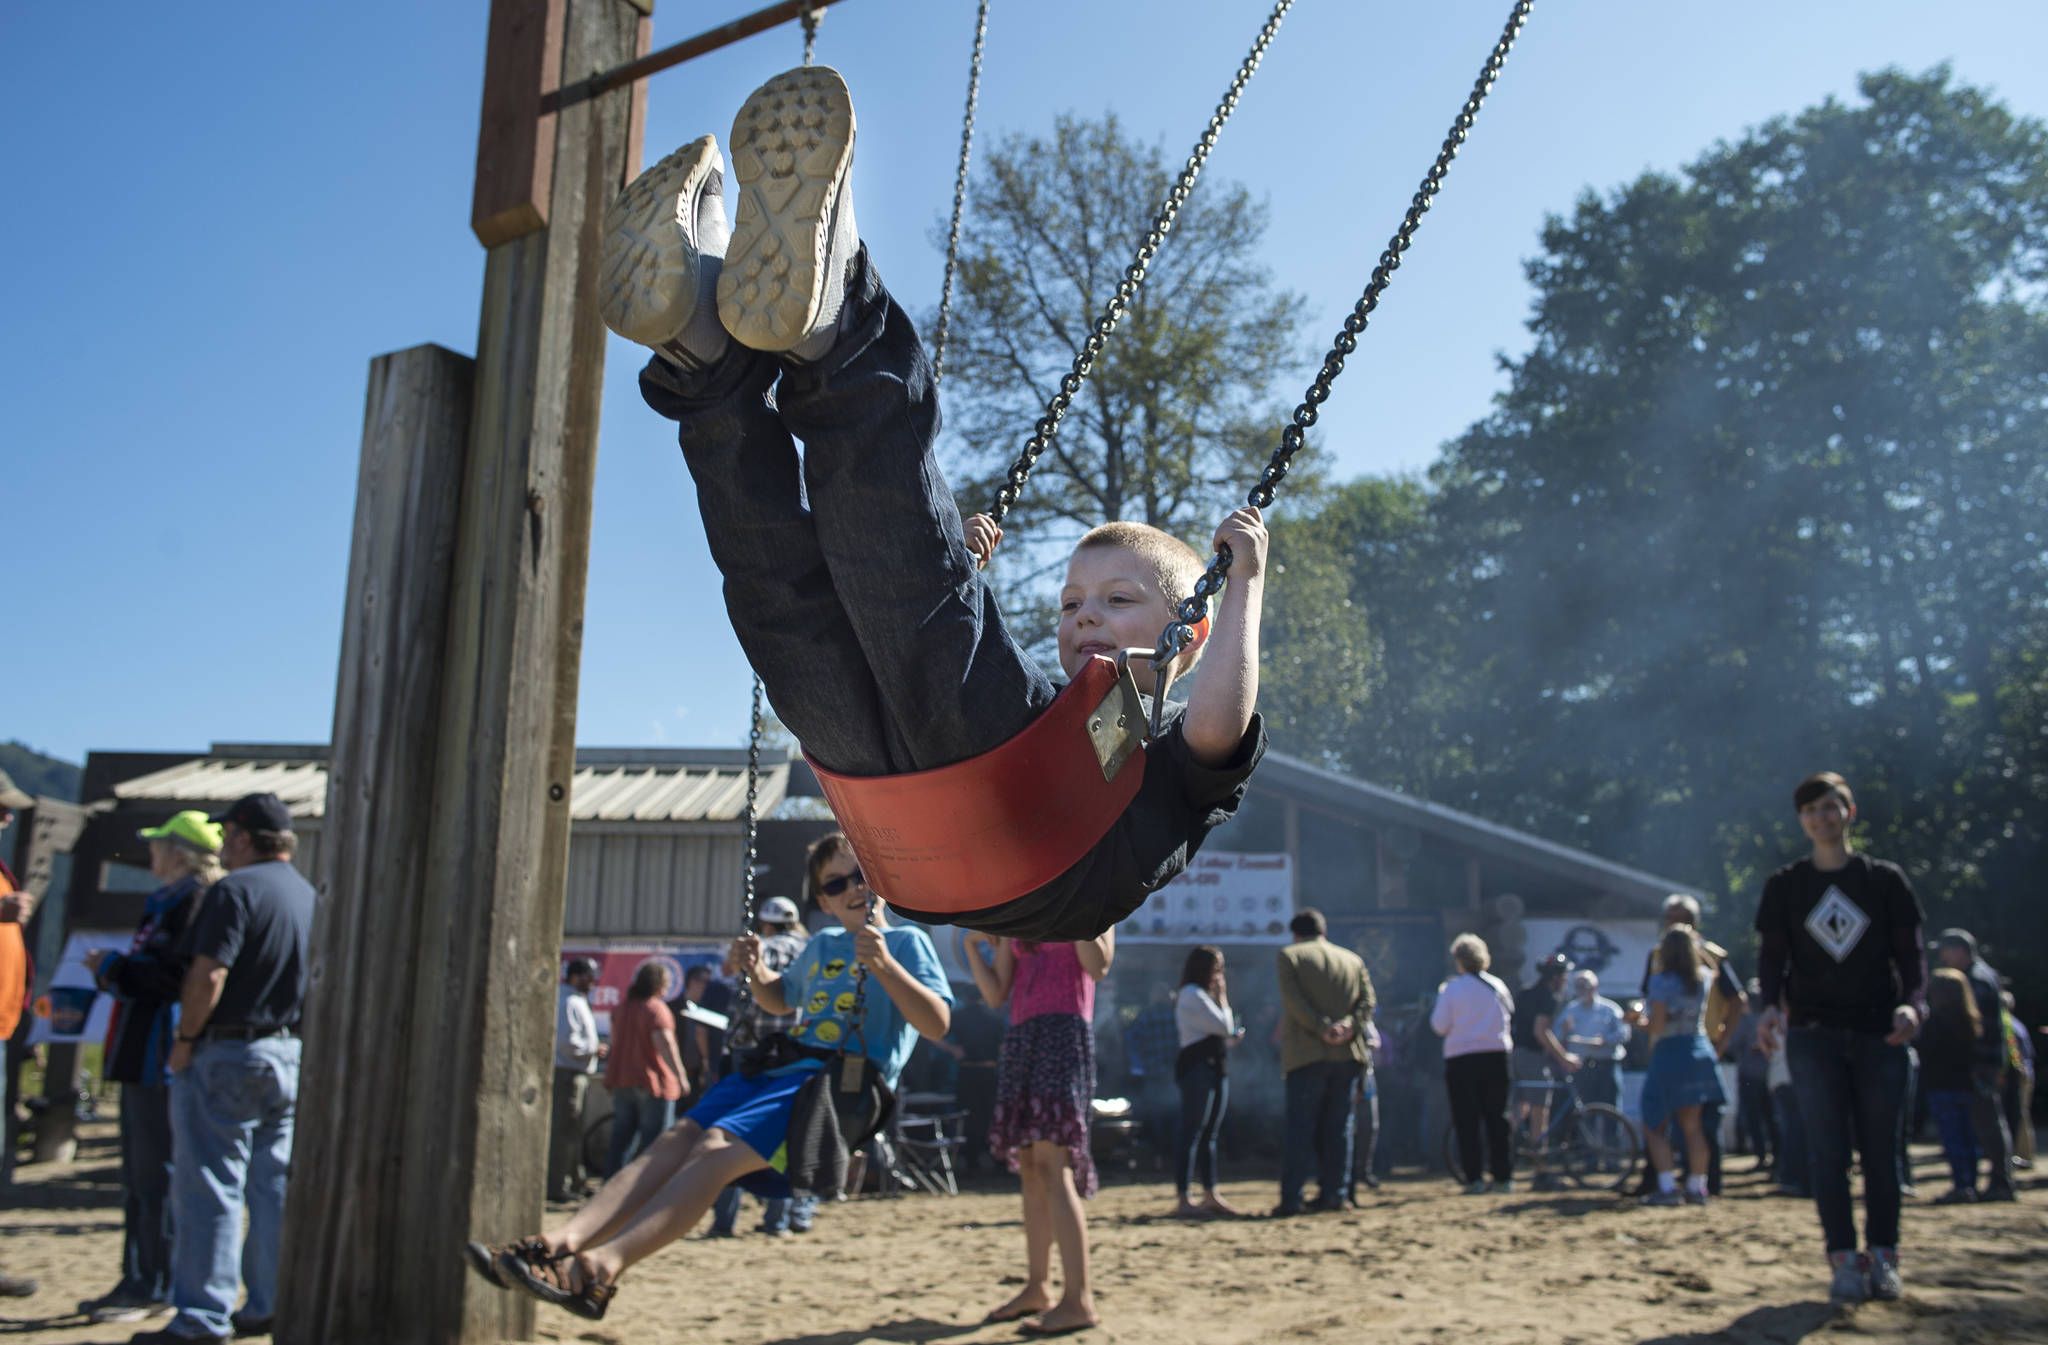 Crystal Koeneman, right, swings her son, Tyr, 6 during the Labor Day picnic at Sandy Beach on Monday, Sept. 3, 2018. (Michael Penn | Juneau Empire)